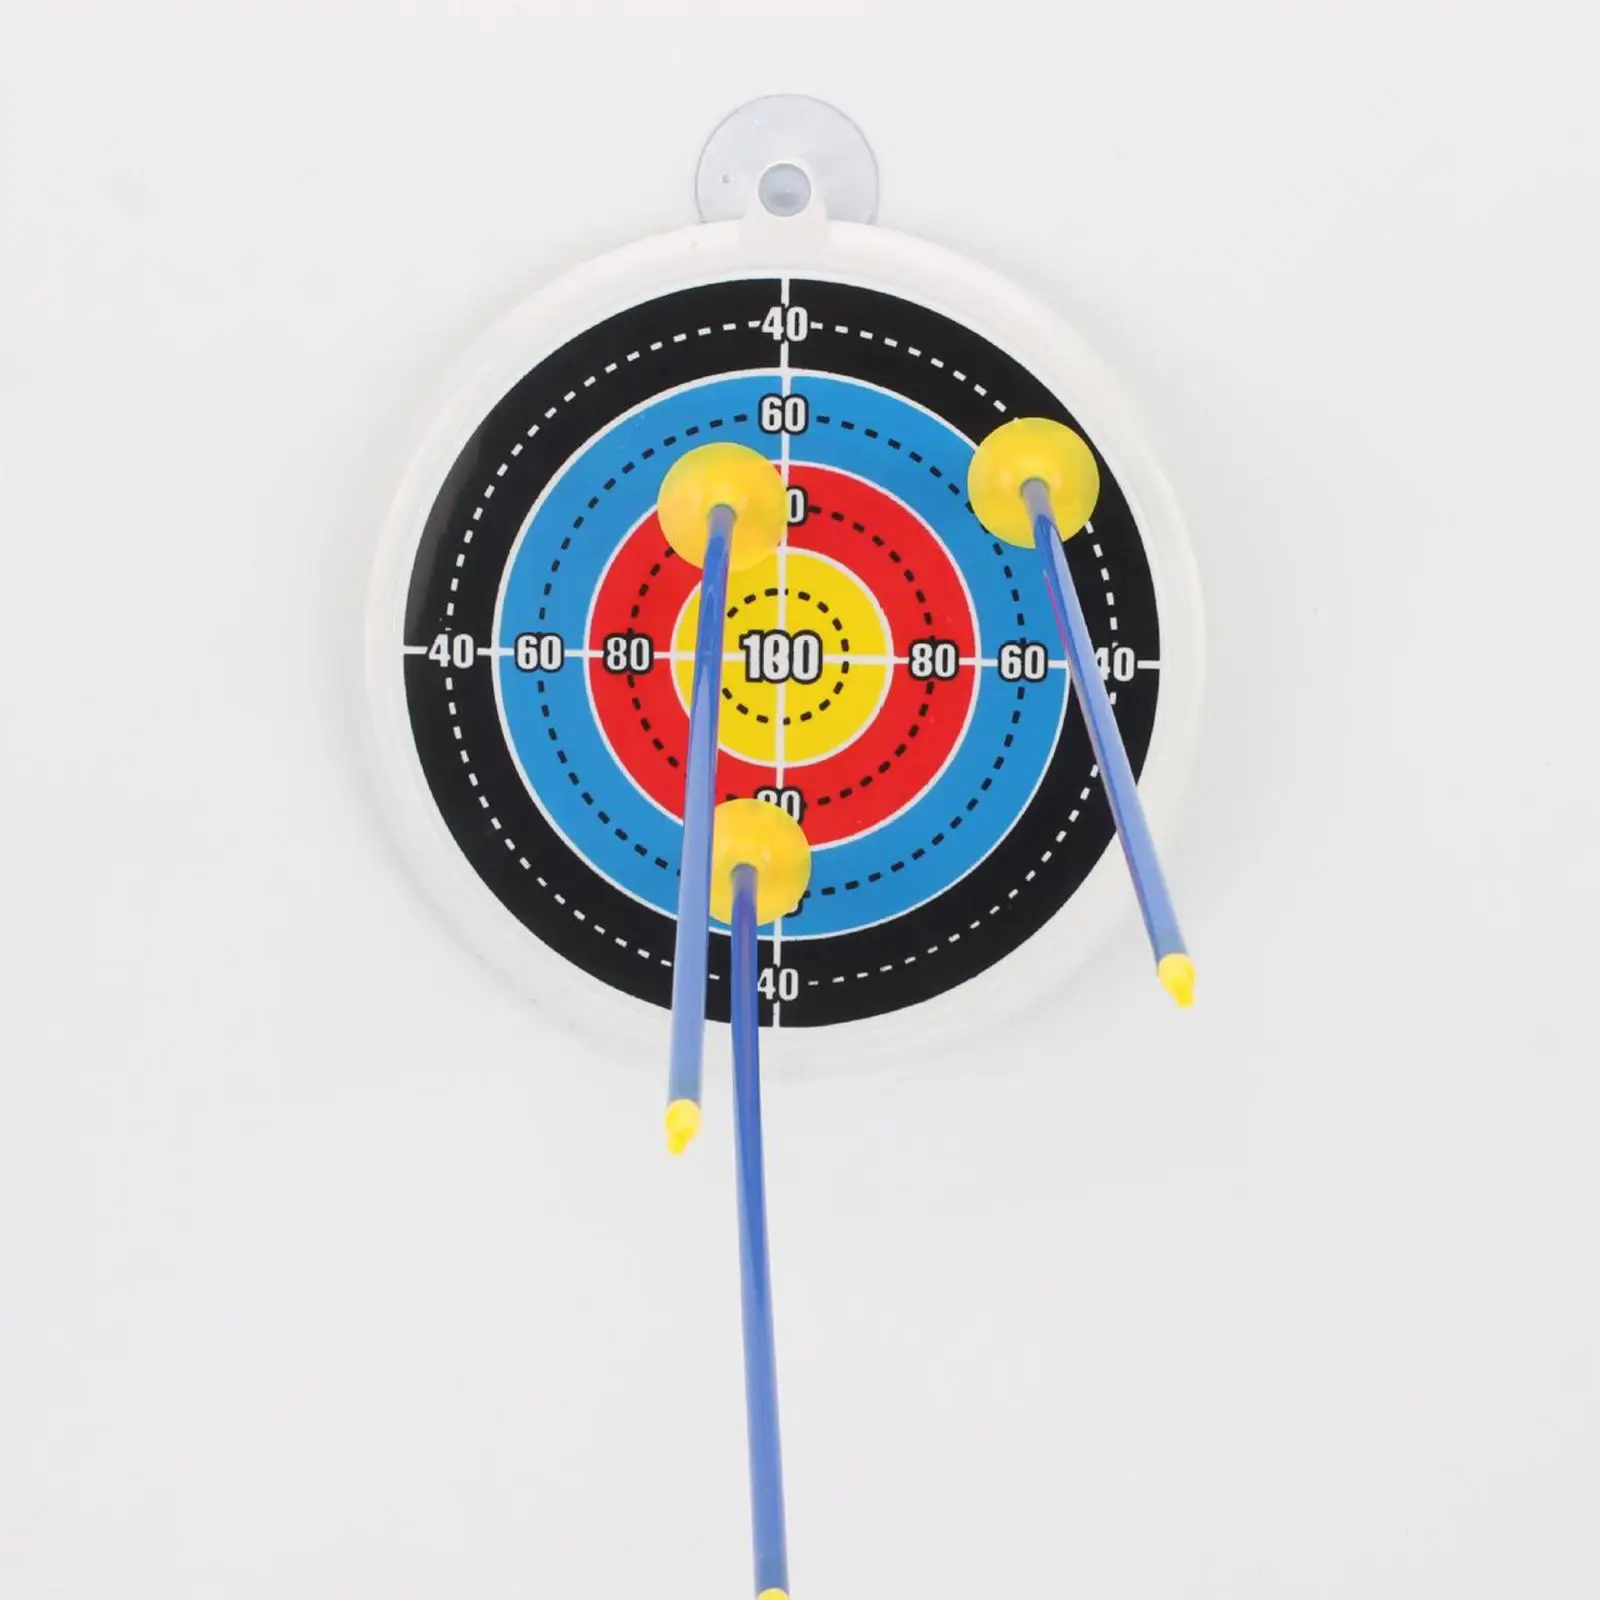 Hanging Target Bow Target Suction Cup Target for Boys Girls Training Playing